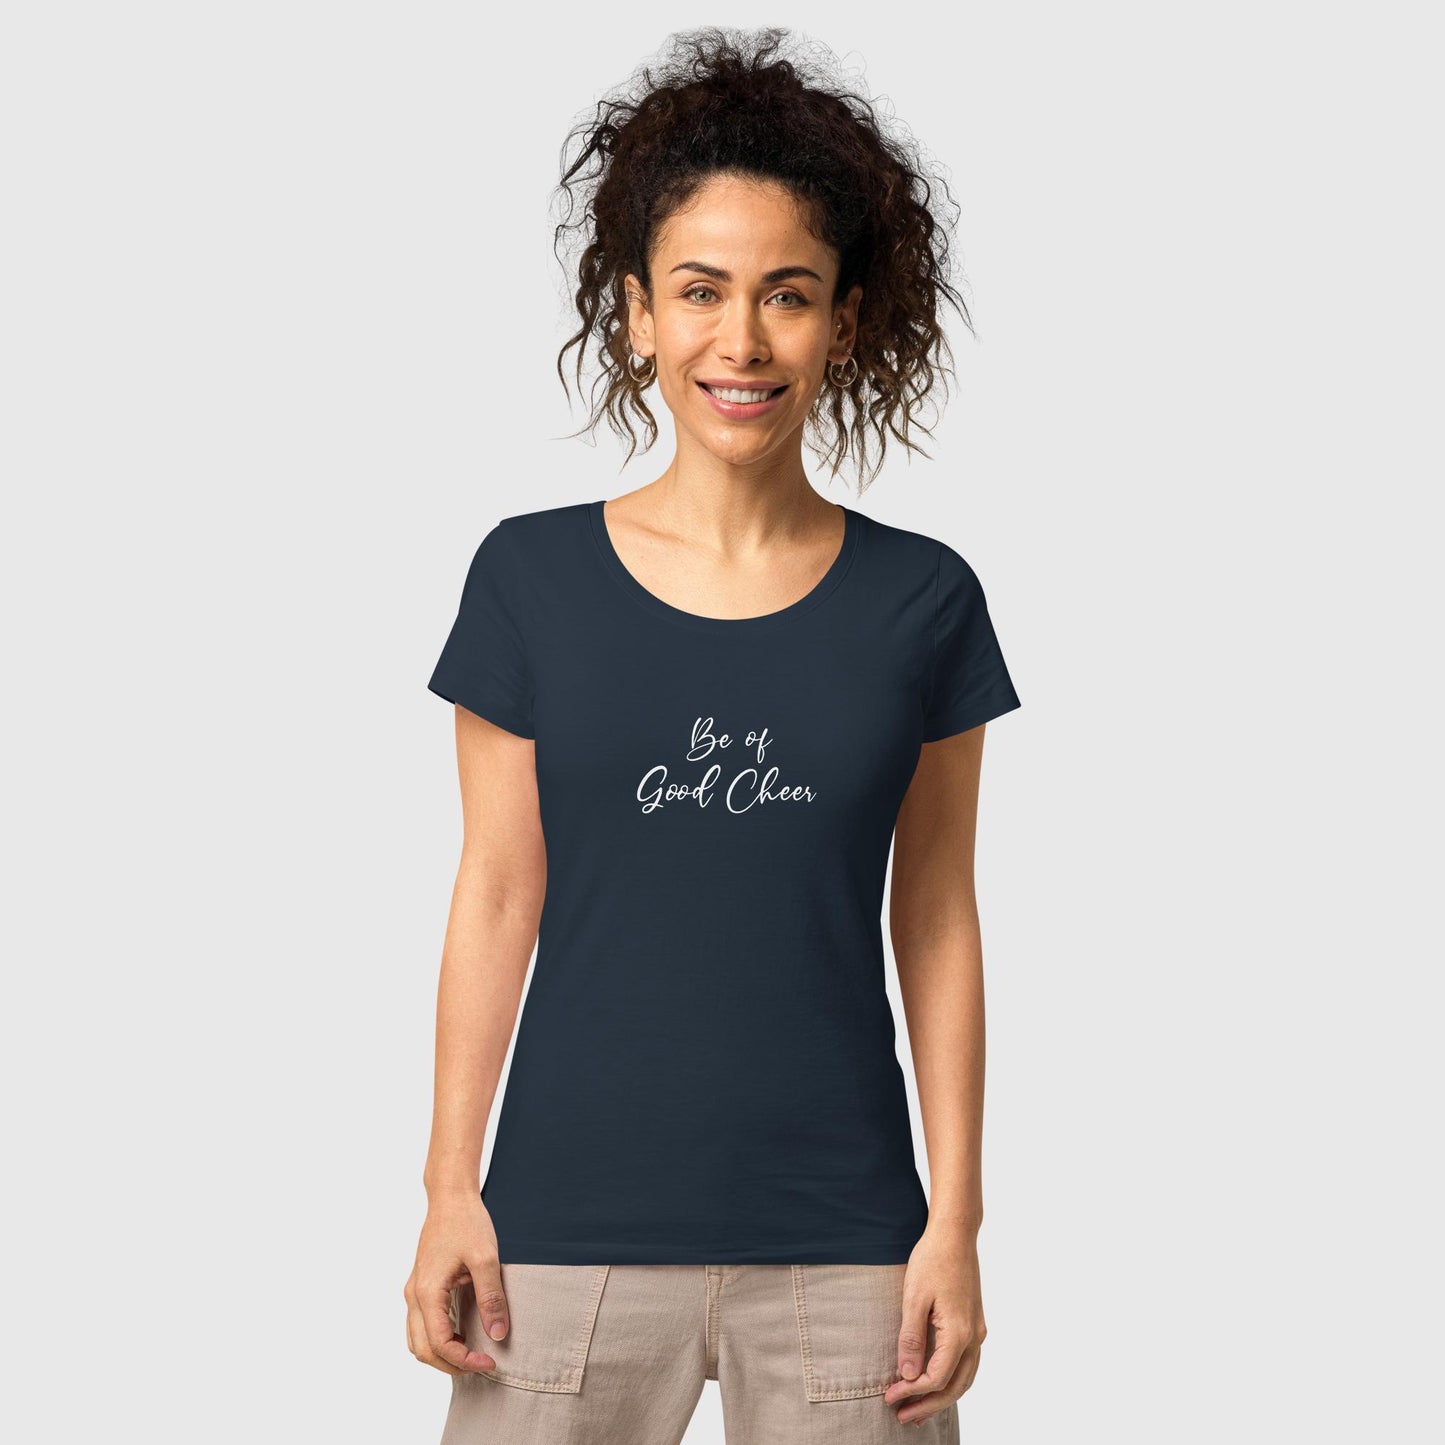 Women's navy organic cotton t-shirt that features the positive quote, "Be of Good Cheer."